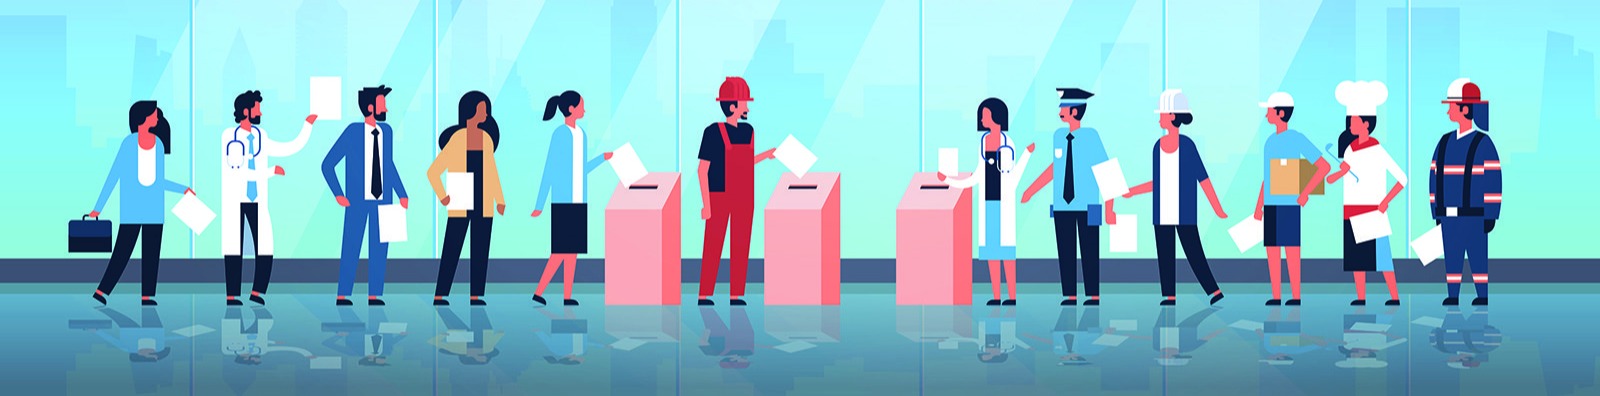 vector image of people voting